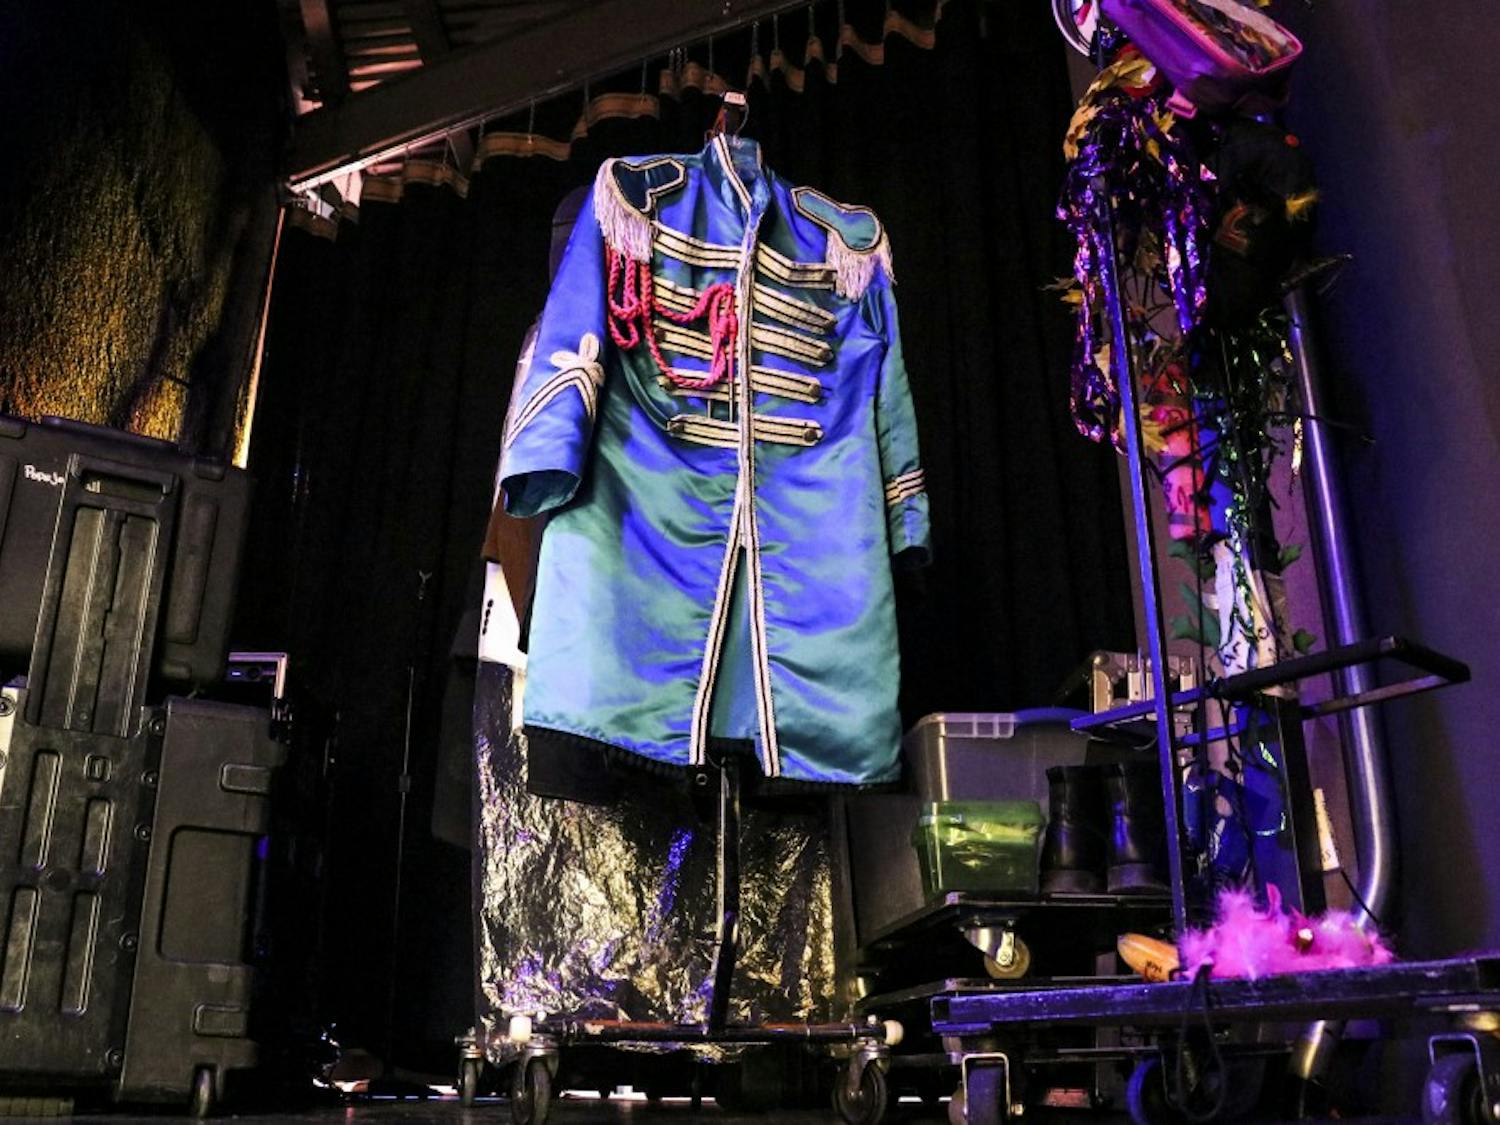 A replica of the iconic Beatles costume hangs&nbsp;backstage&nbsp;in Popejoy on Feb. 3, 2018. &nbsp;